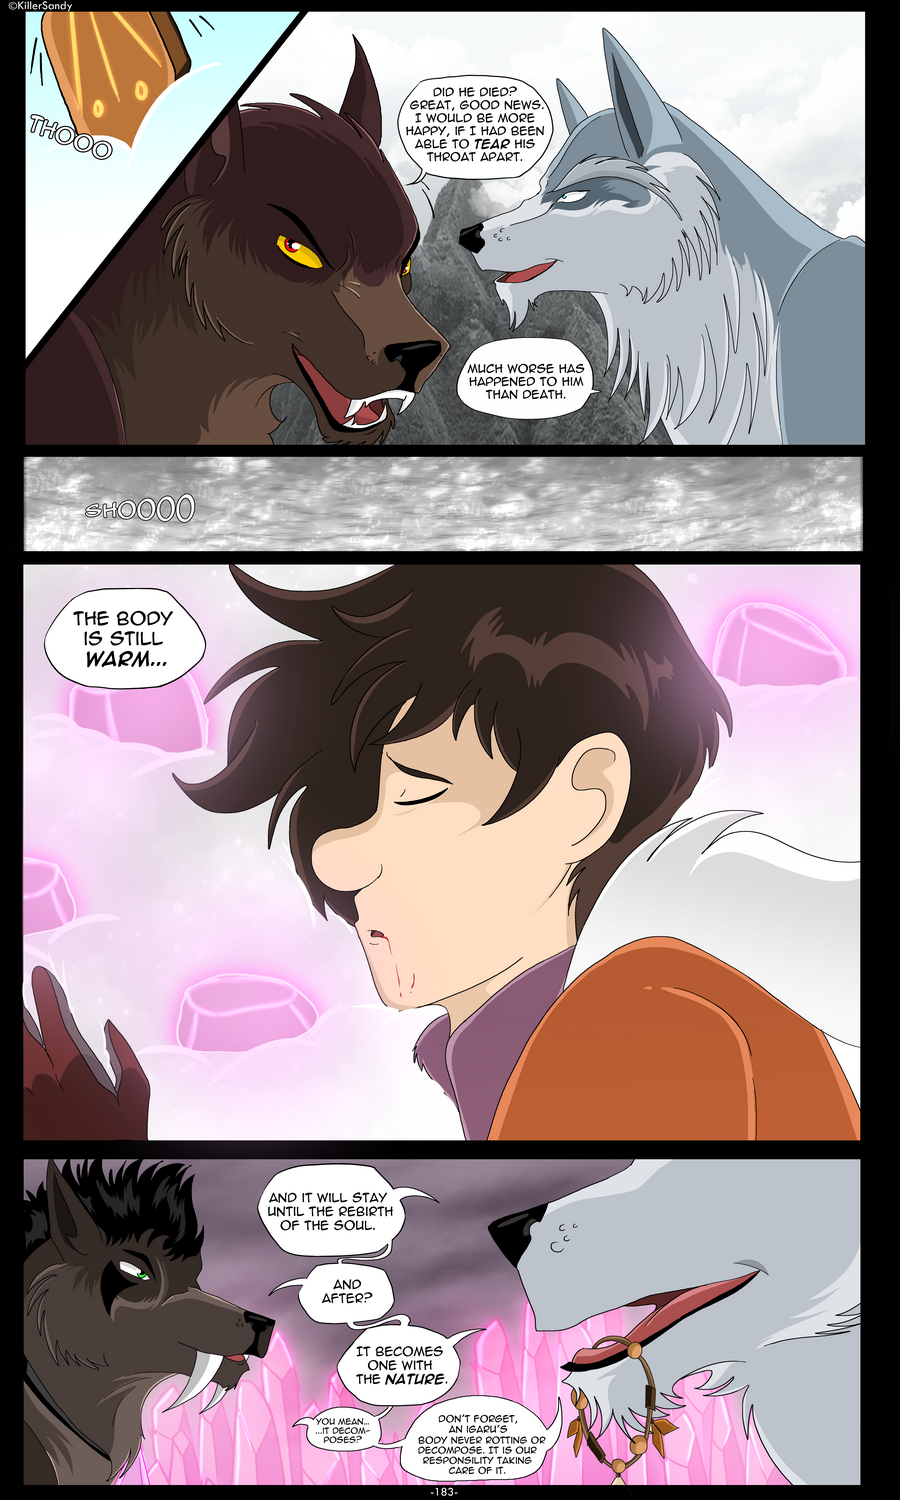 The Prince of the Moonlight Stone page 183